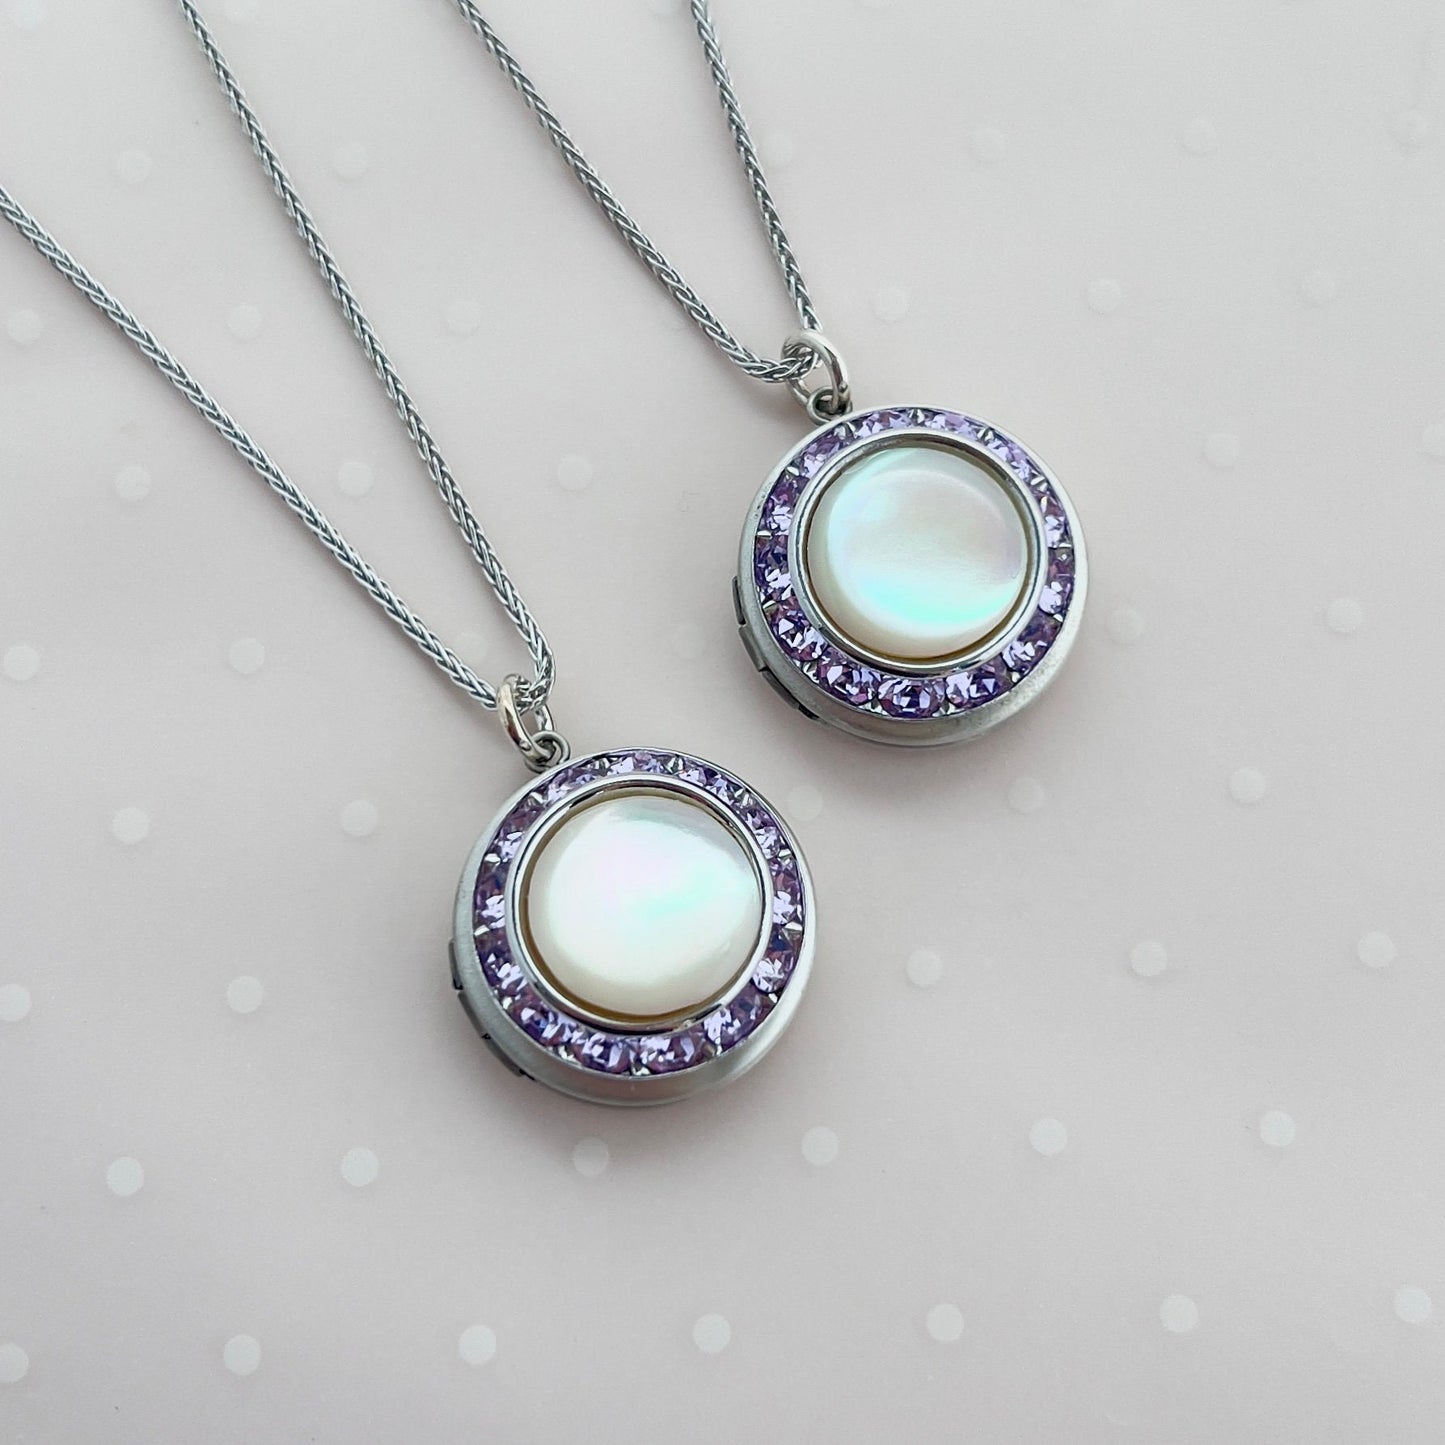 Unique Mother Daughter Necklace Set of 2, Photo Locket, Matching Necklaces, Purple Crystal Jewelry